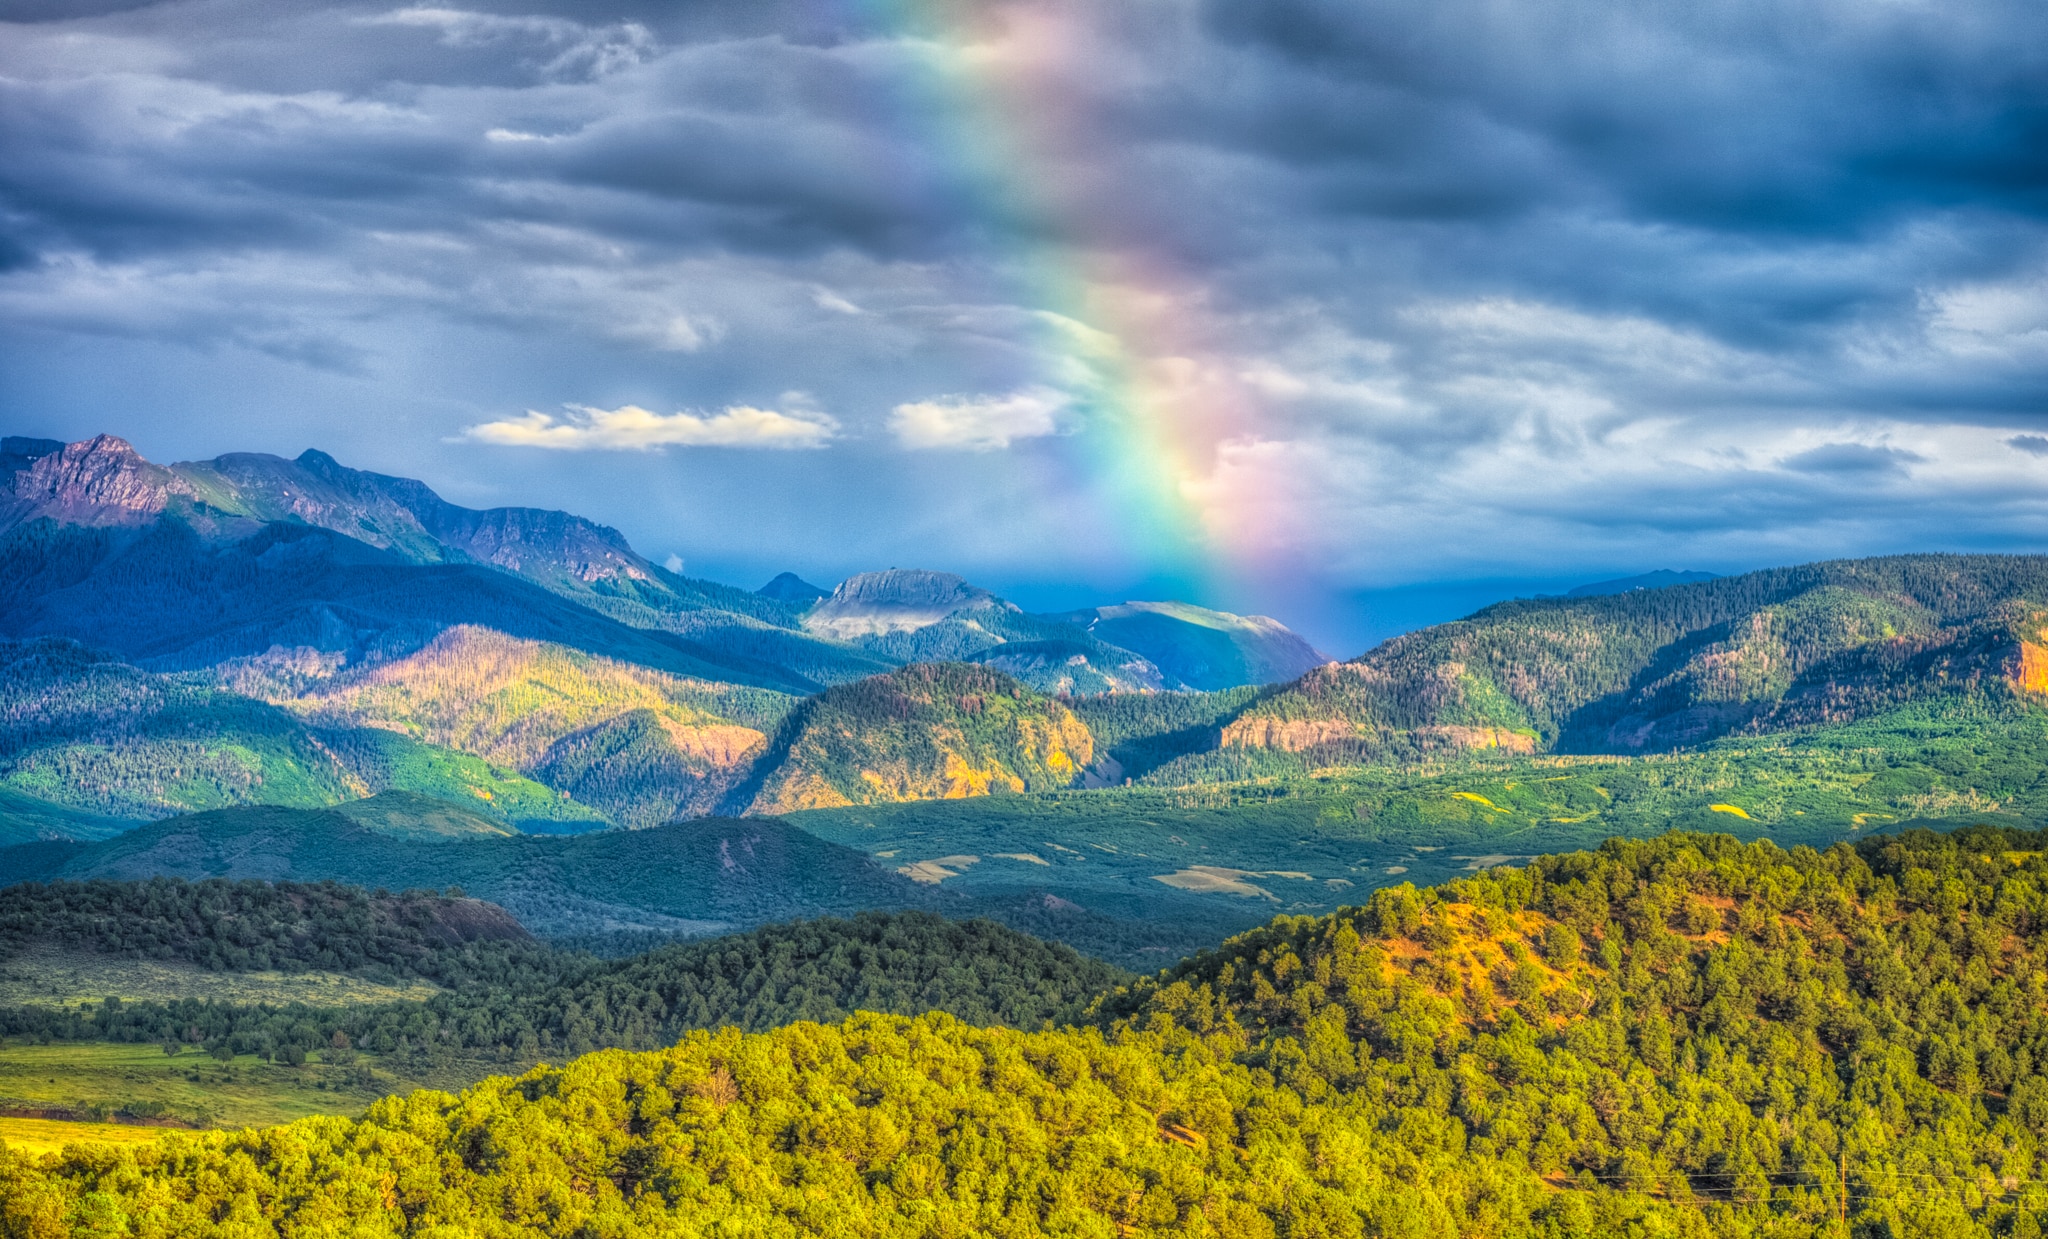 A rainbow paints the sky after a thunderstorm, as seen from Ridgway State Park near Ridgway, Colorado.